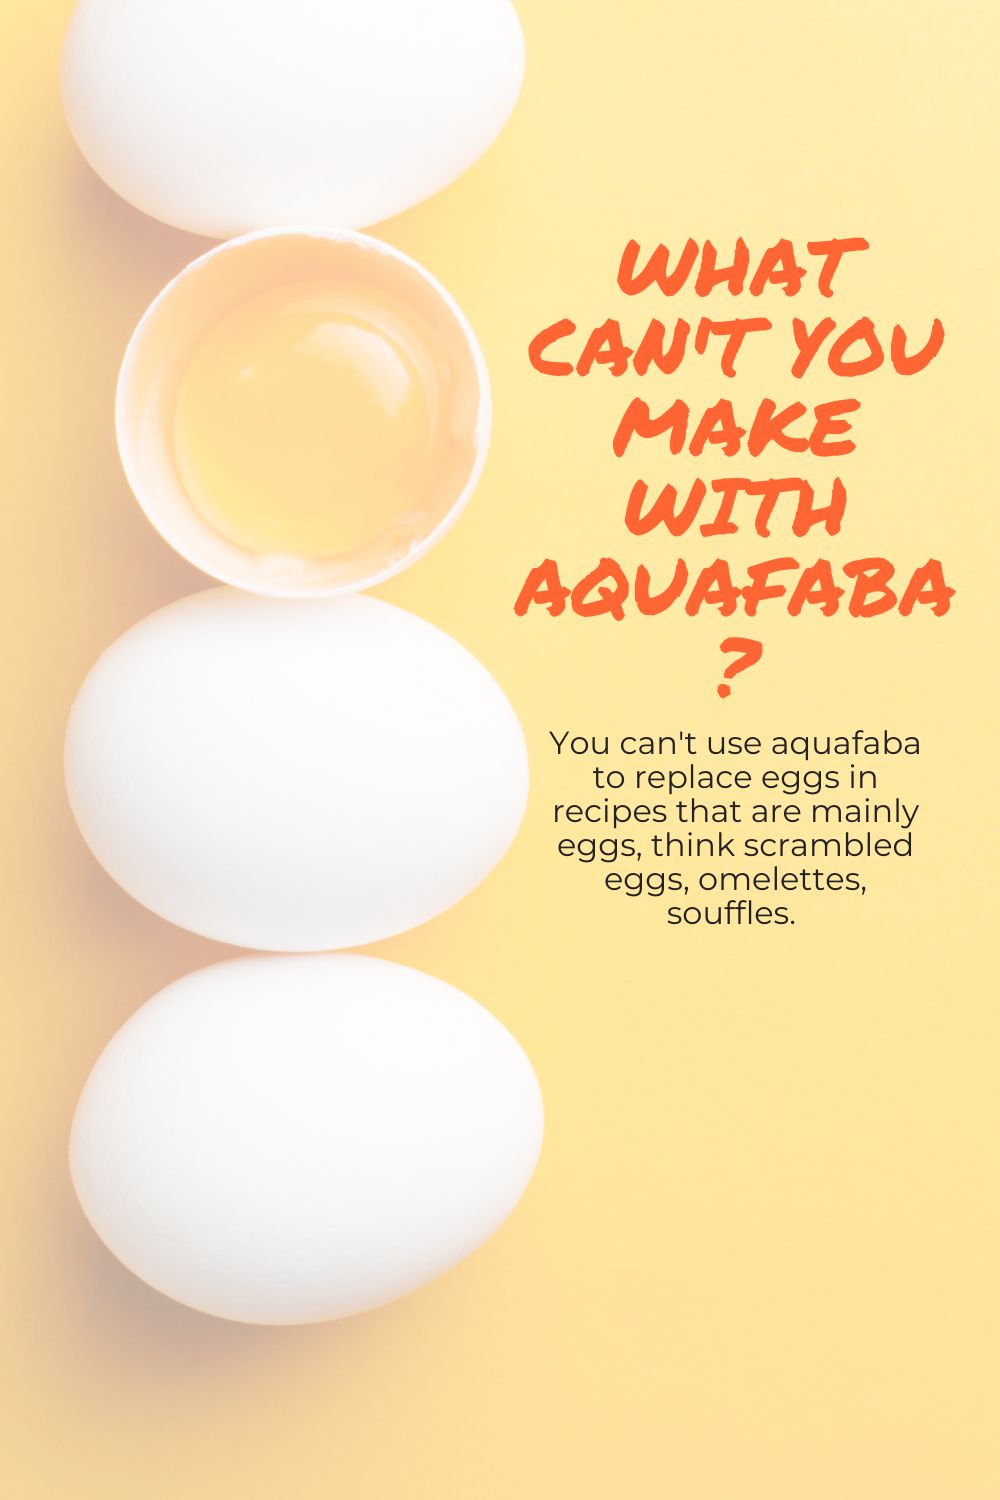 Graphic: What can't you make with aquafaba? You can't use aquafaba to replace eggs in recipes that are mainly eggs, think scrambled eggs, omelettes, souffles.